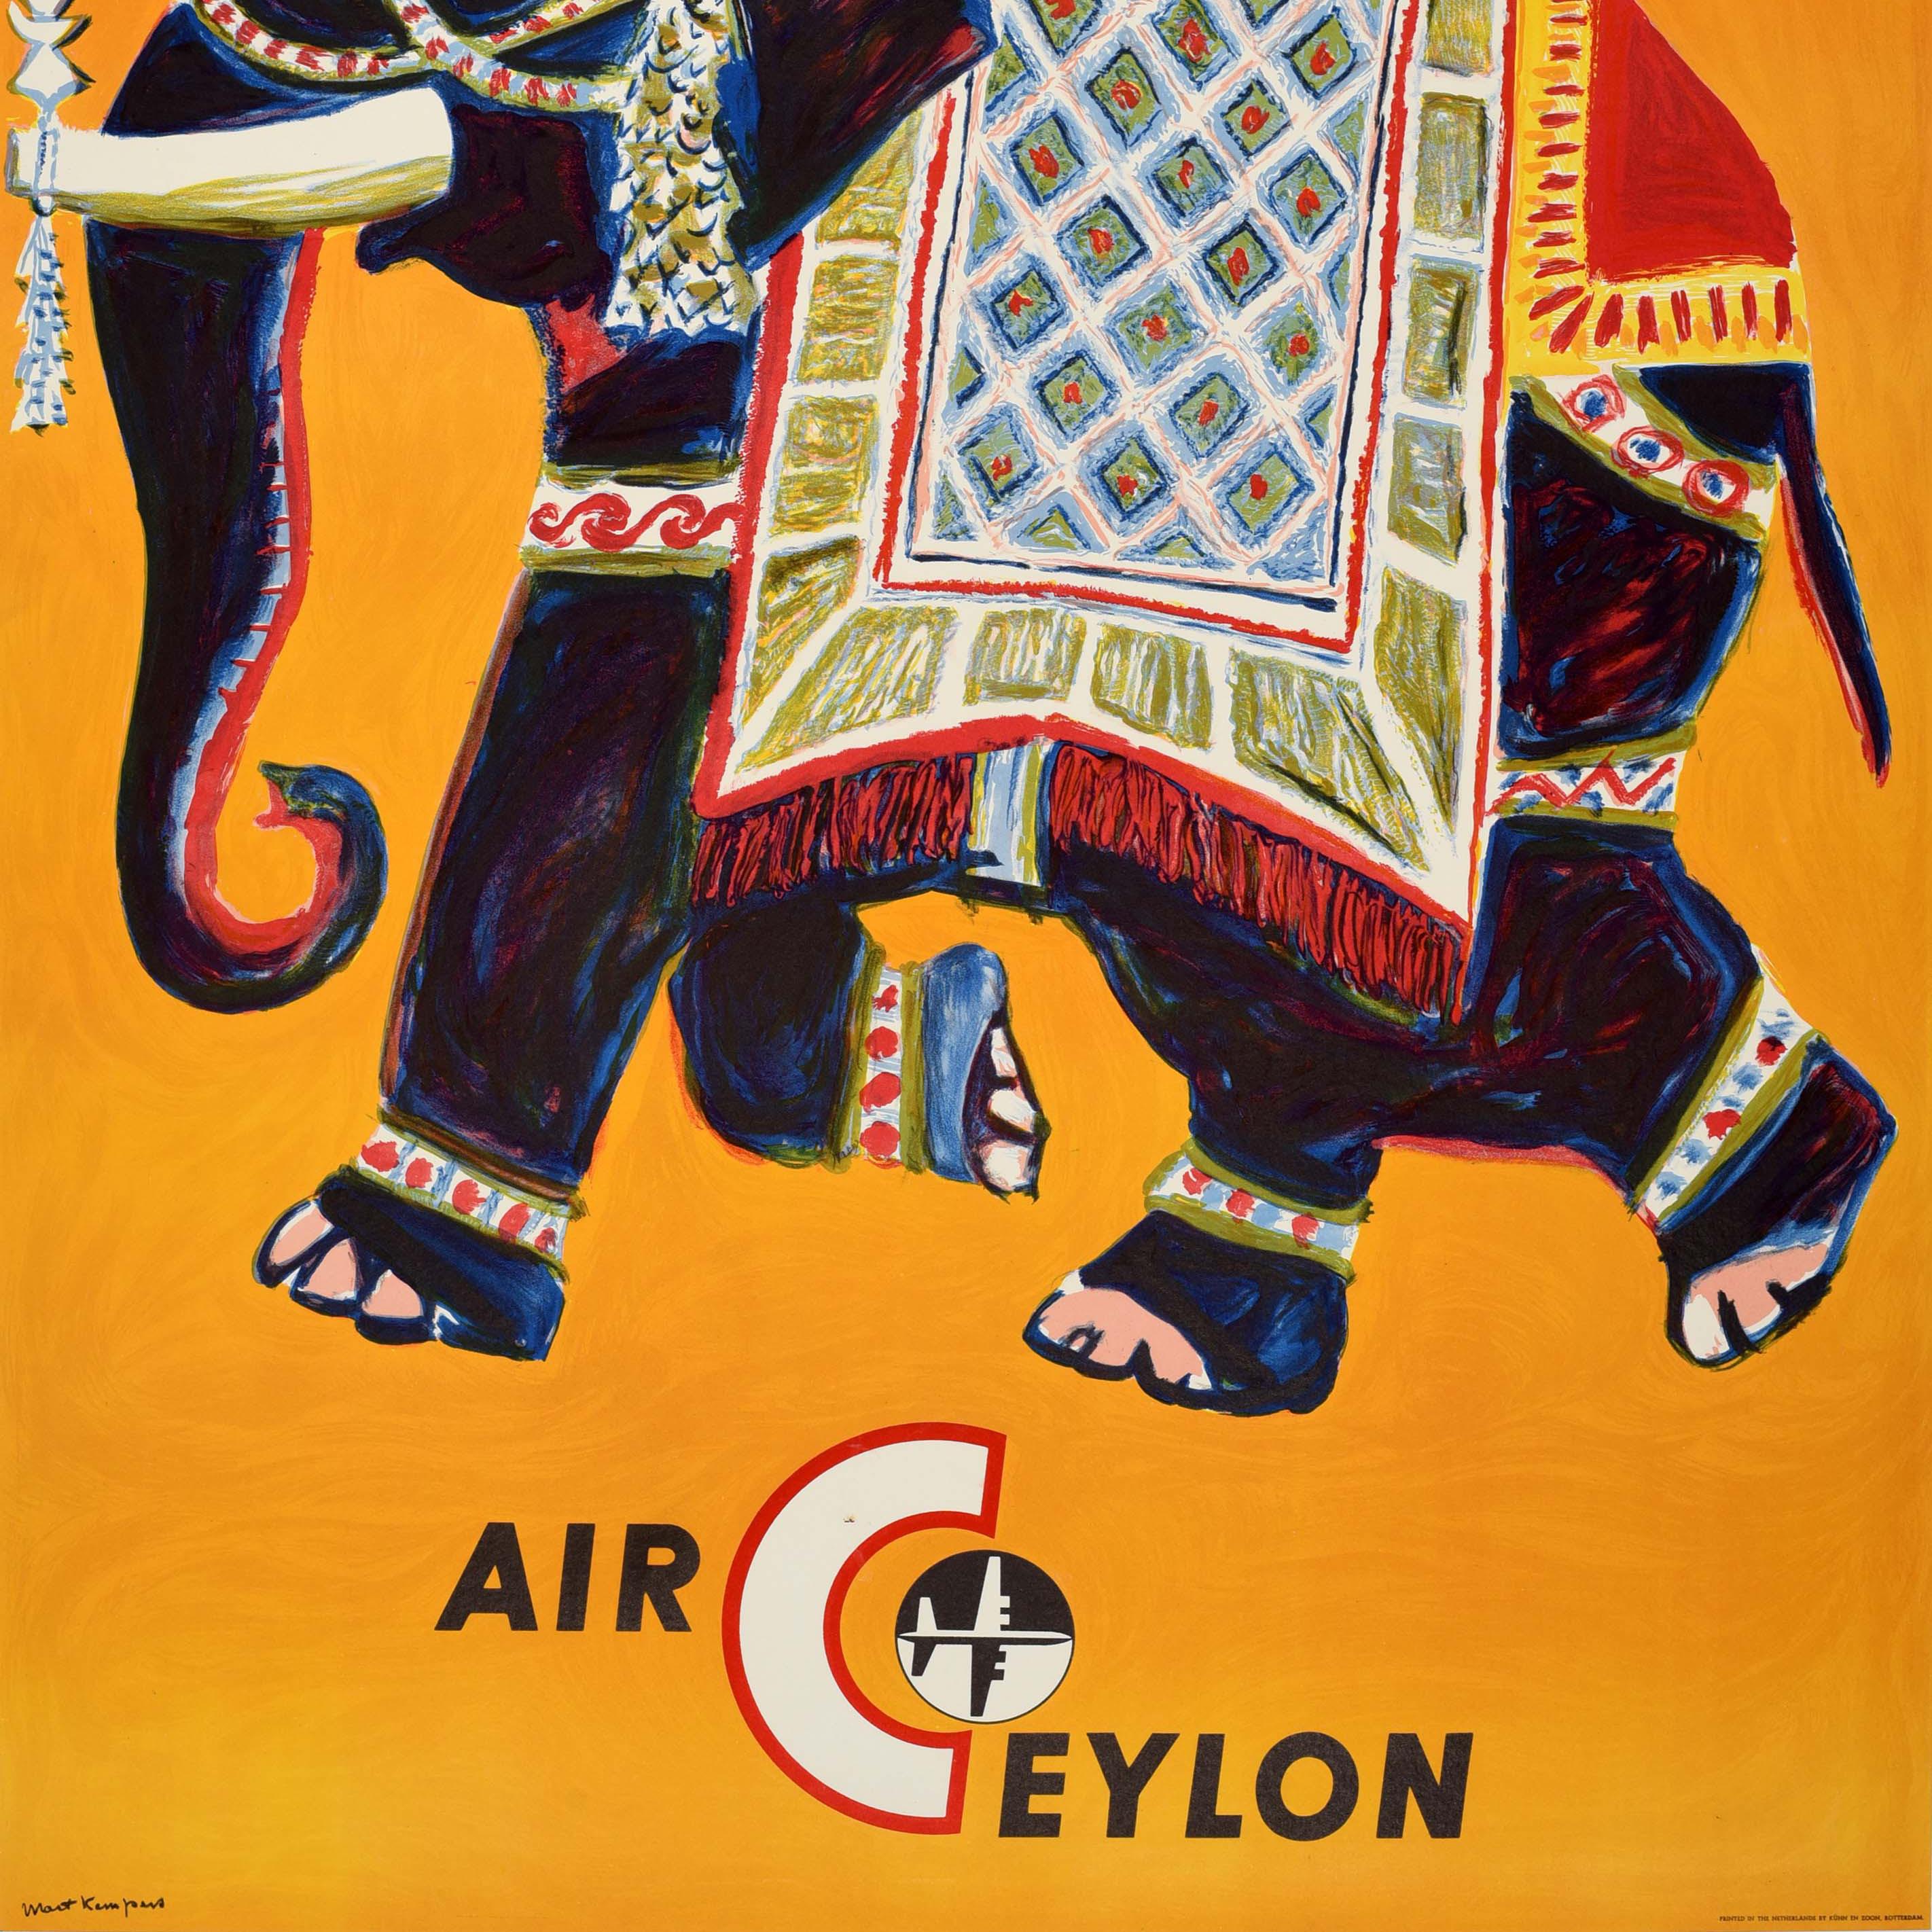 Original Vintage South Asia Travel Poster Air Ceylon Airline Sri Lanka Elephant In Good Condition For Sale In London, GB